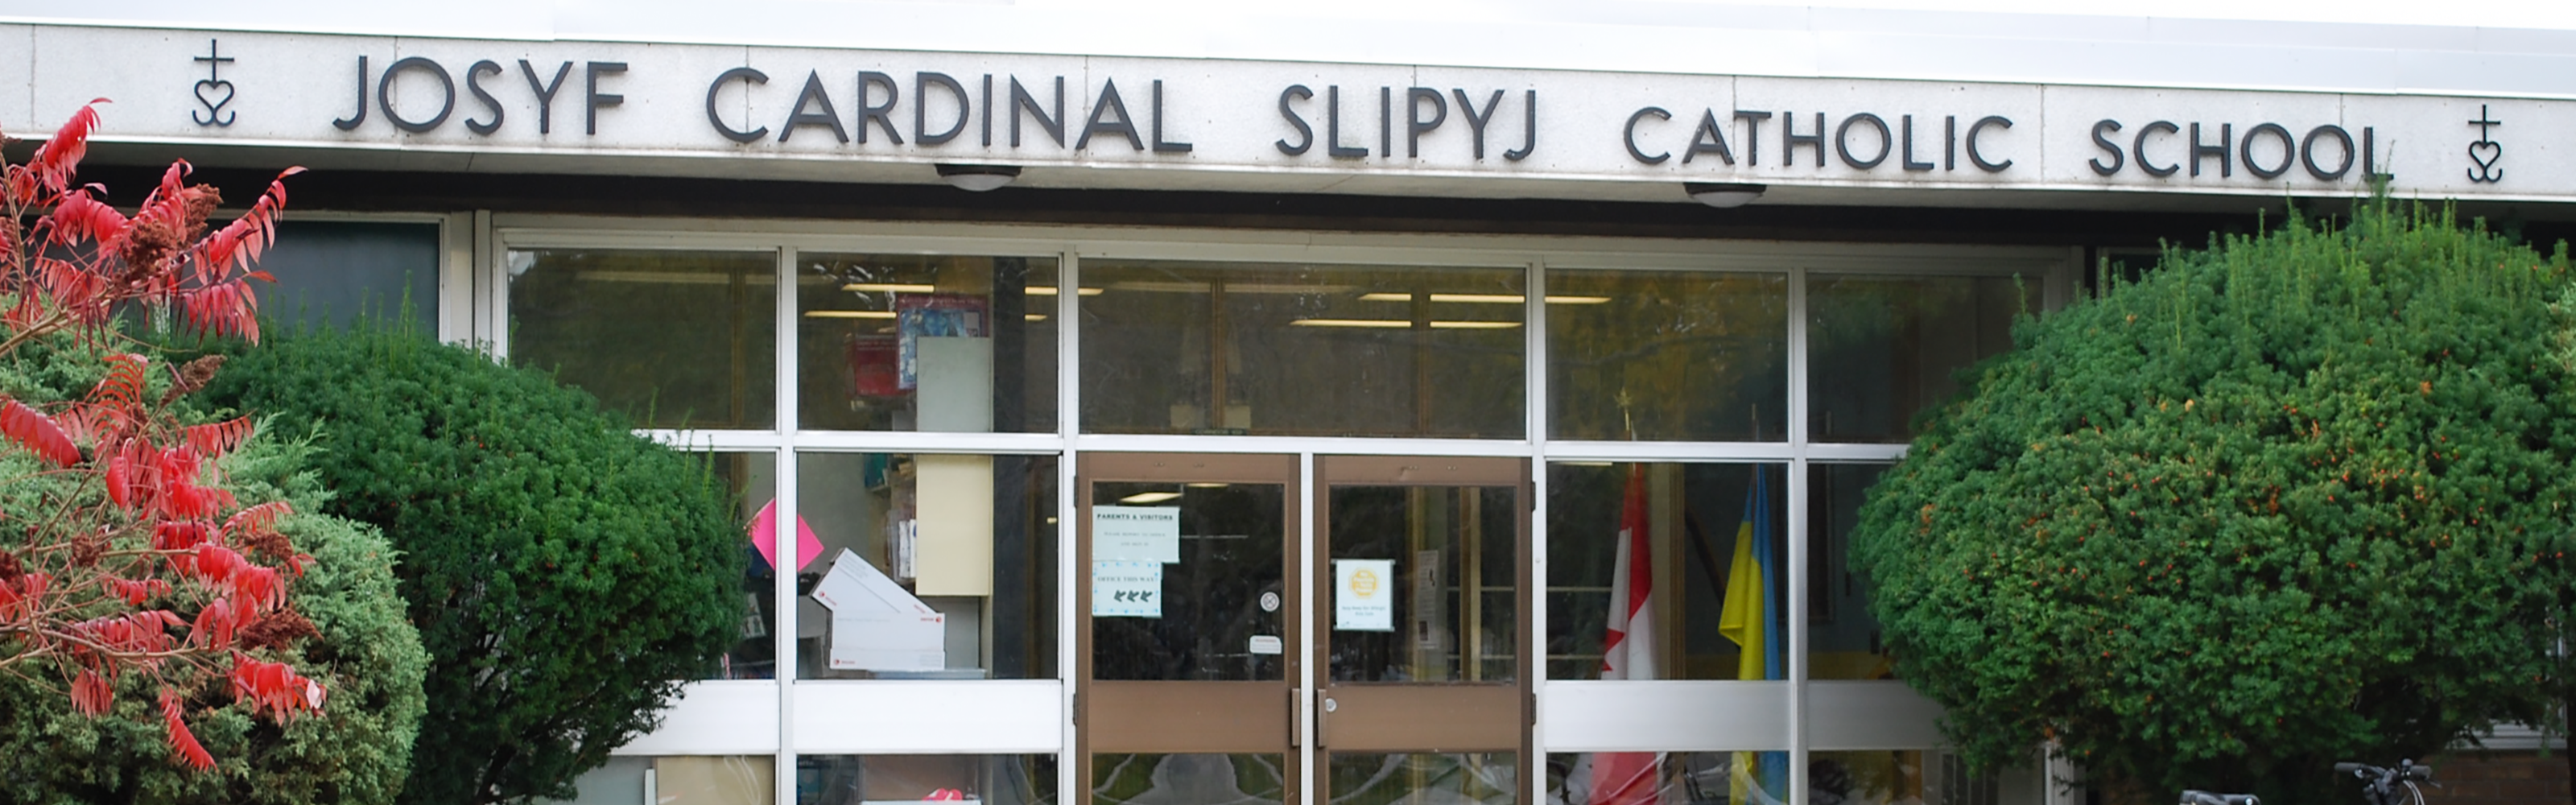 The front of the Josyf Cardinal Slipyj Catholic School building.